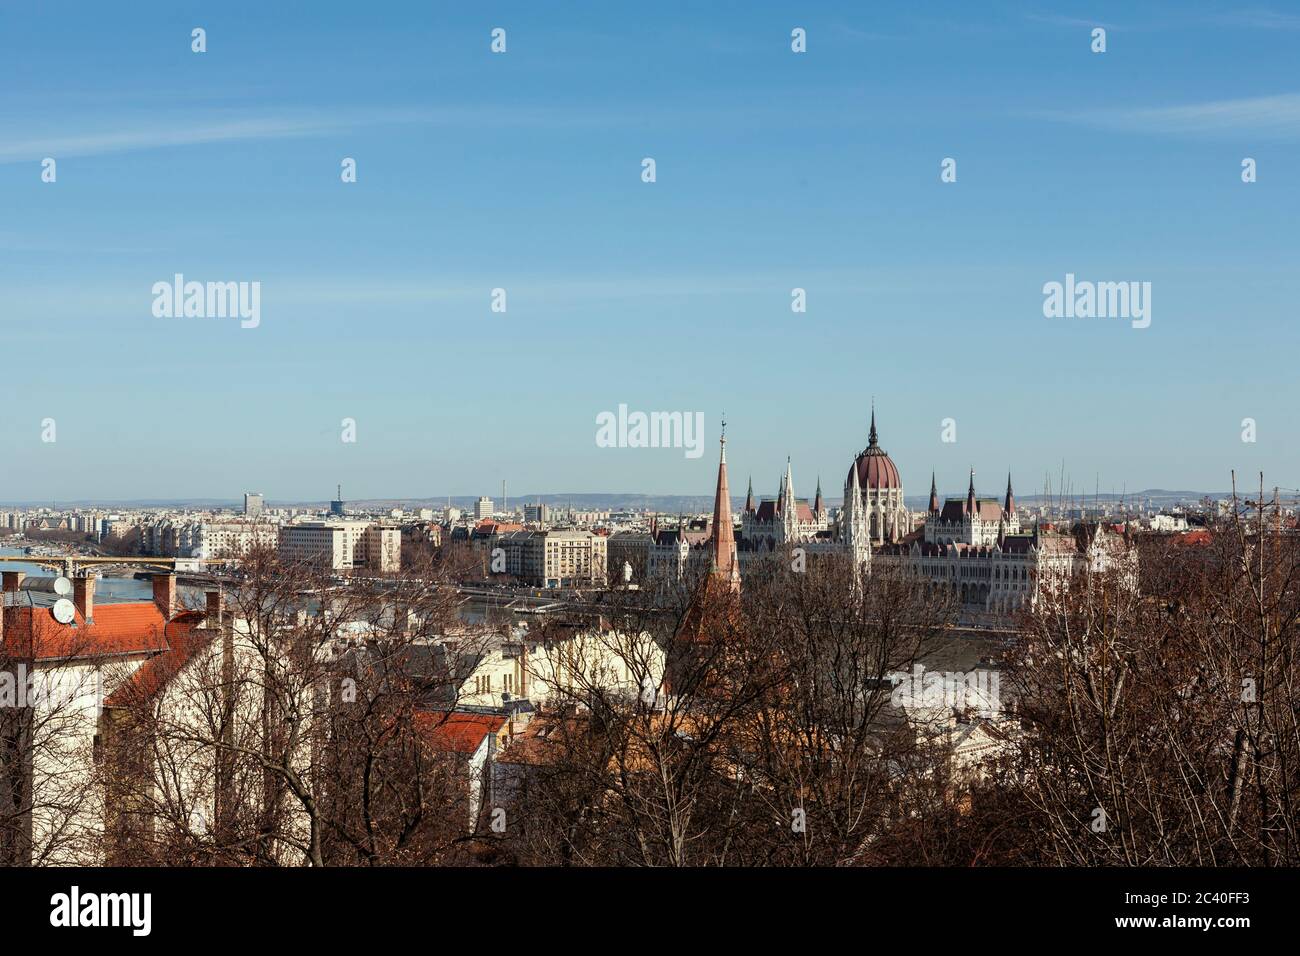 View across the Danube from the Vár in Buda to Pest on the opposite bank, with the Parliament building prominent: Budapest, Hungary Stock Photo